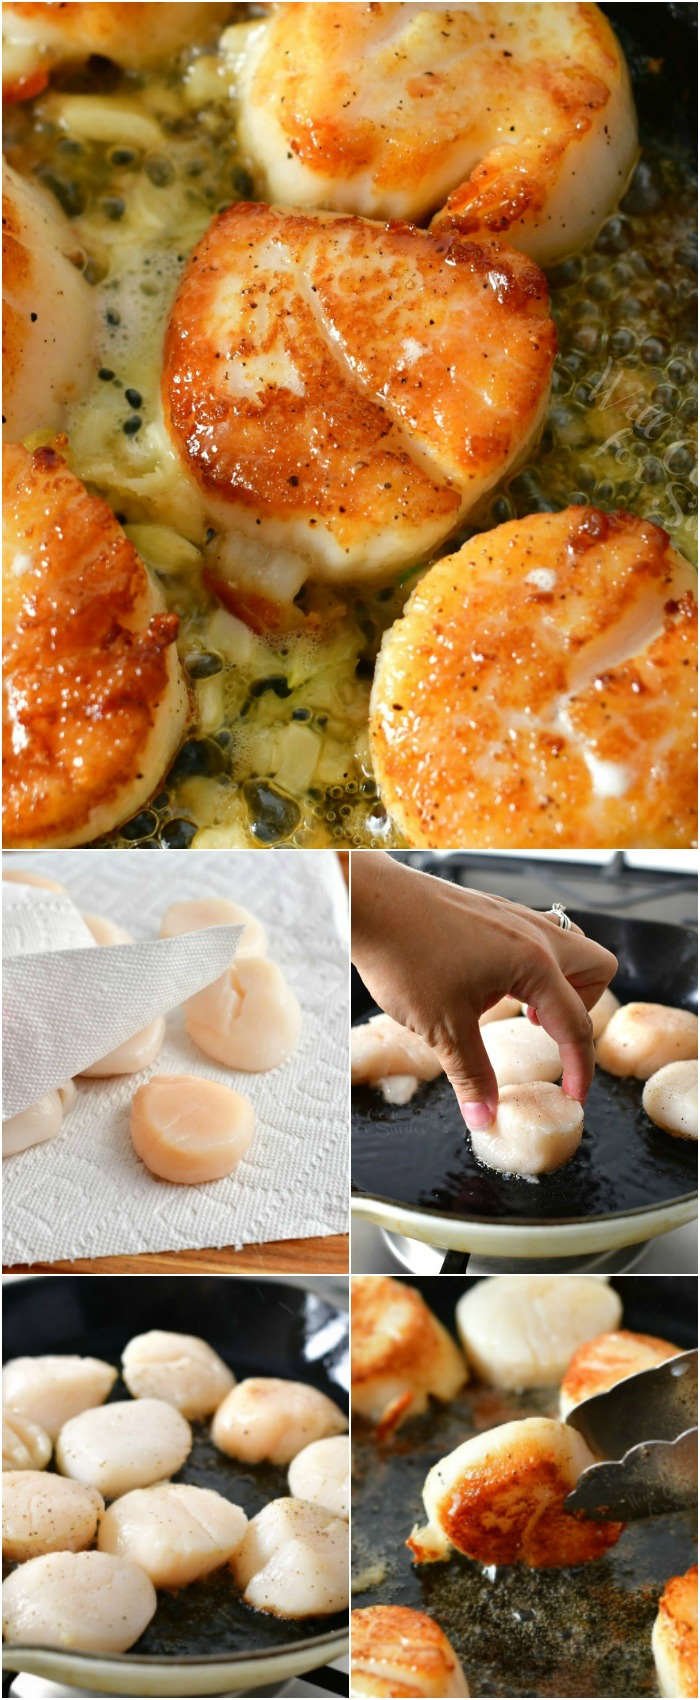 collage of five images: seared scallops on top, then drying scallops with paper towel, then placing a scallop in a hot skillet, scallops cooking on a skillet, and last, flipping over a scallop with tongues